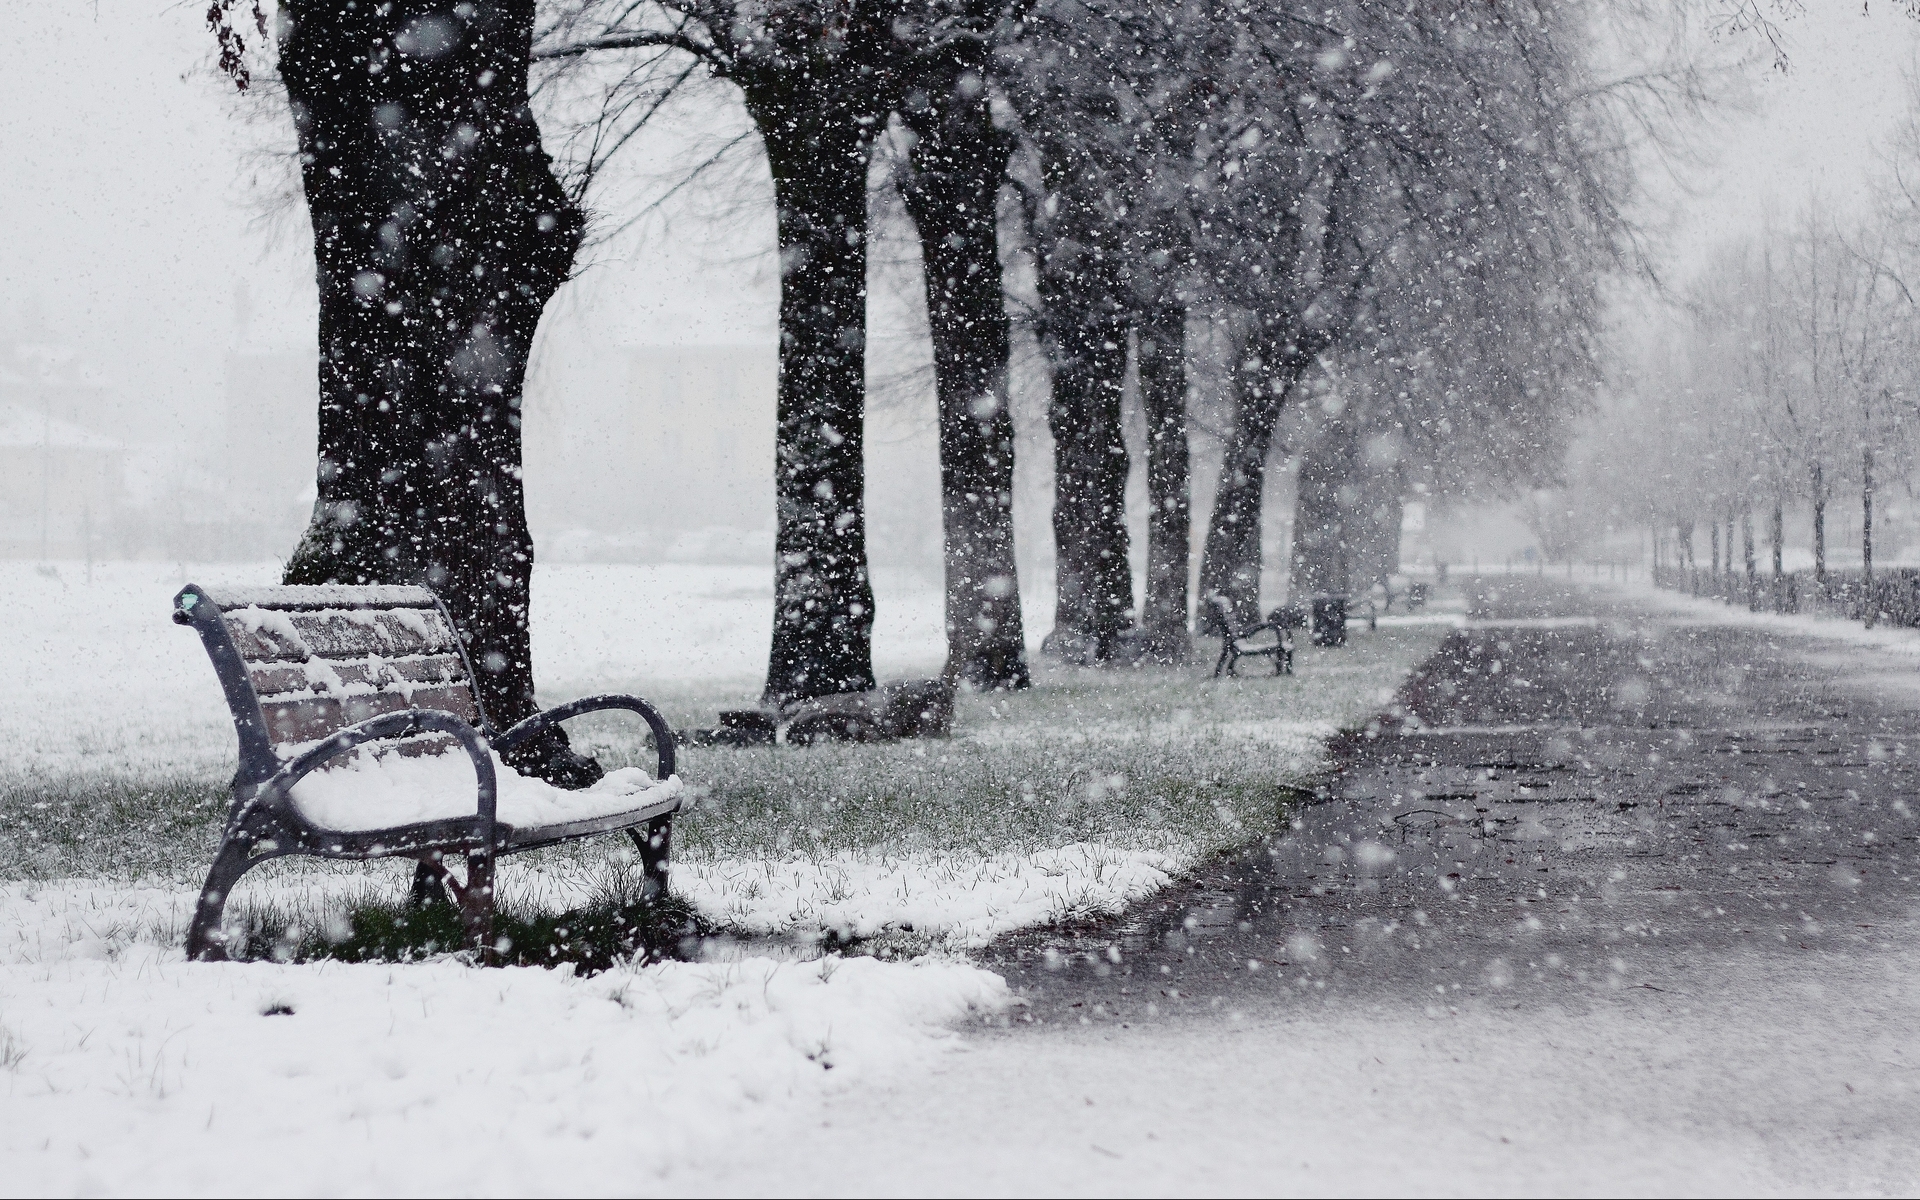 Image: Winter, park, snow, snowfall, snowflakes, road, bench, trees, grass, puddle